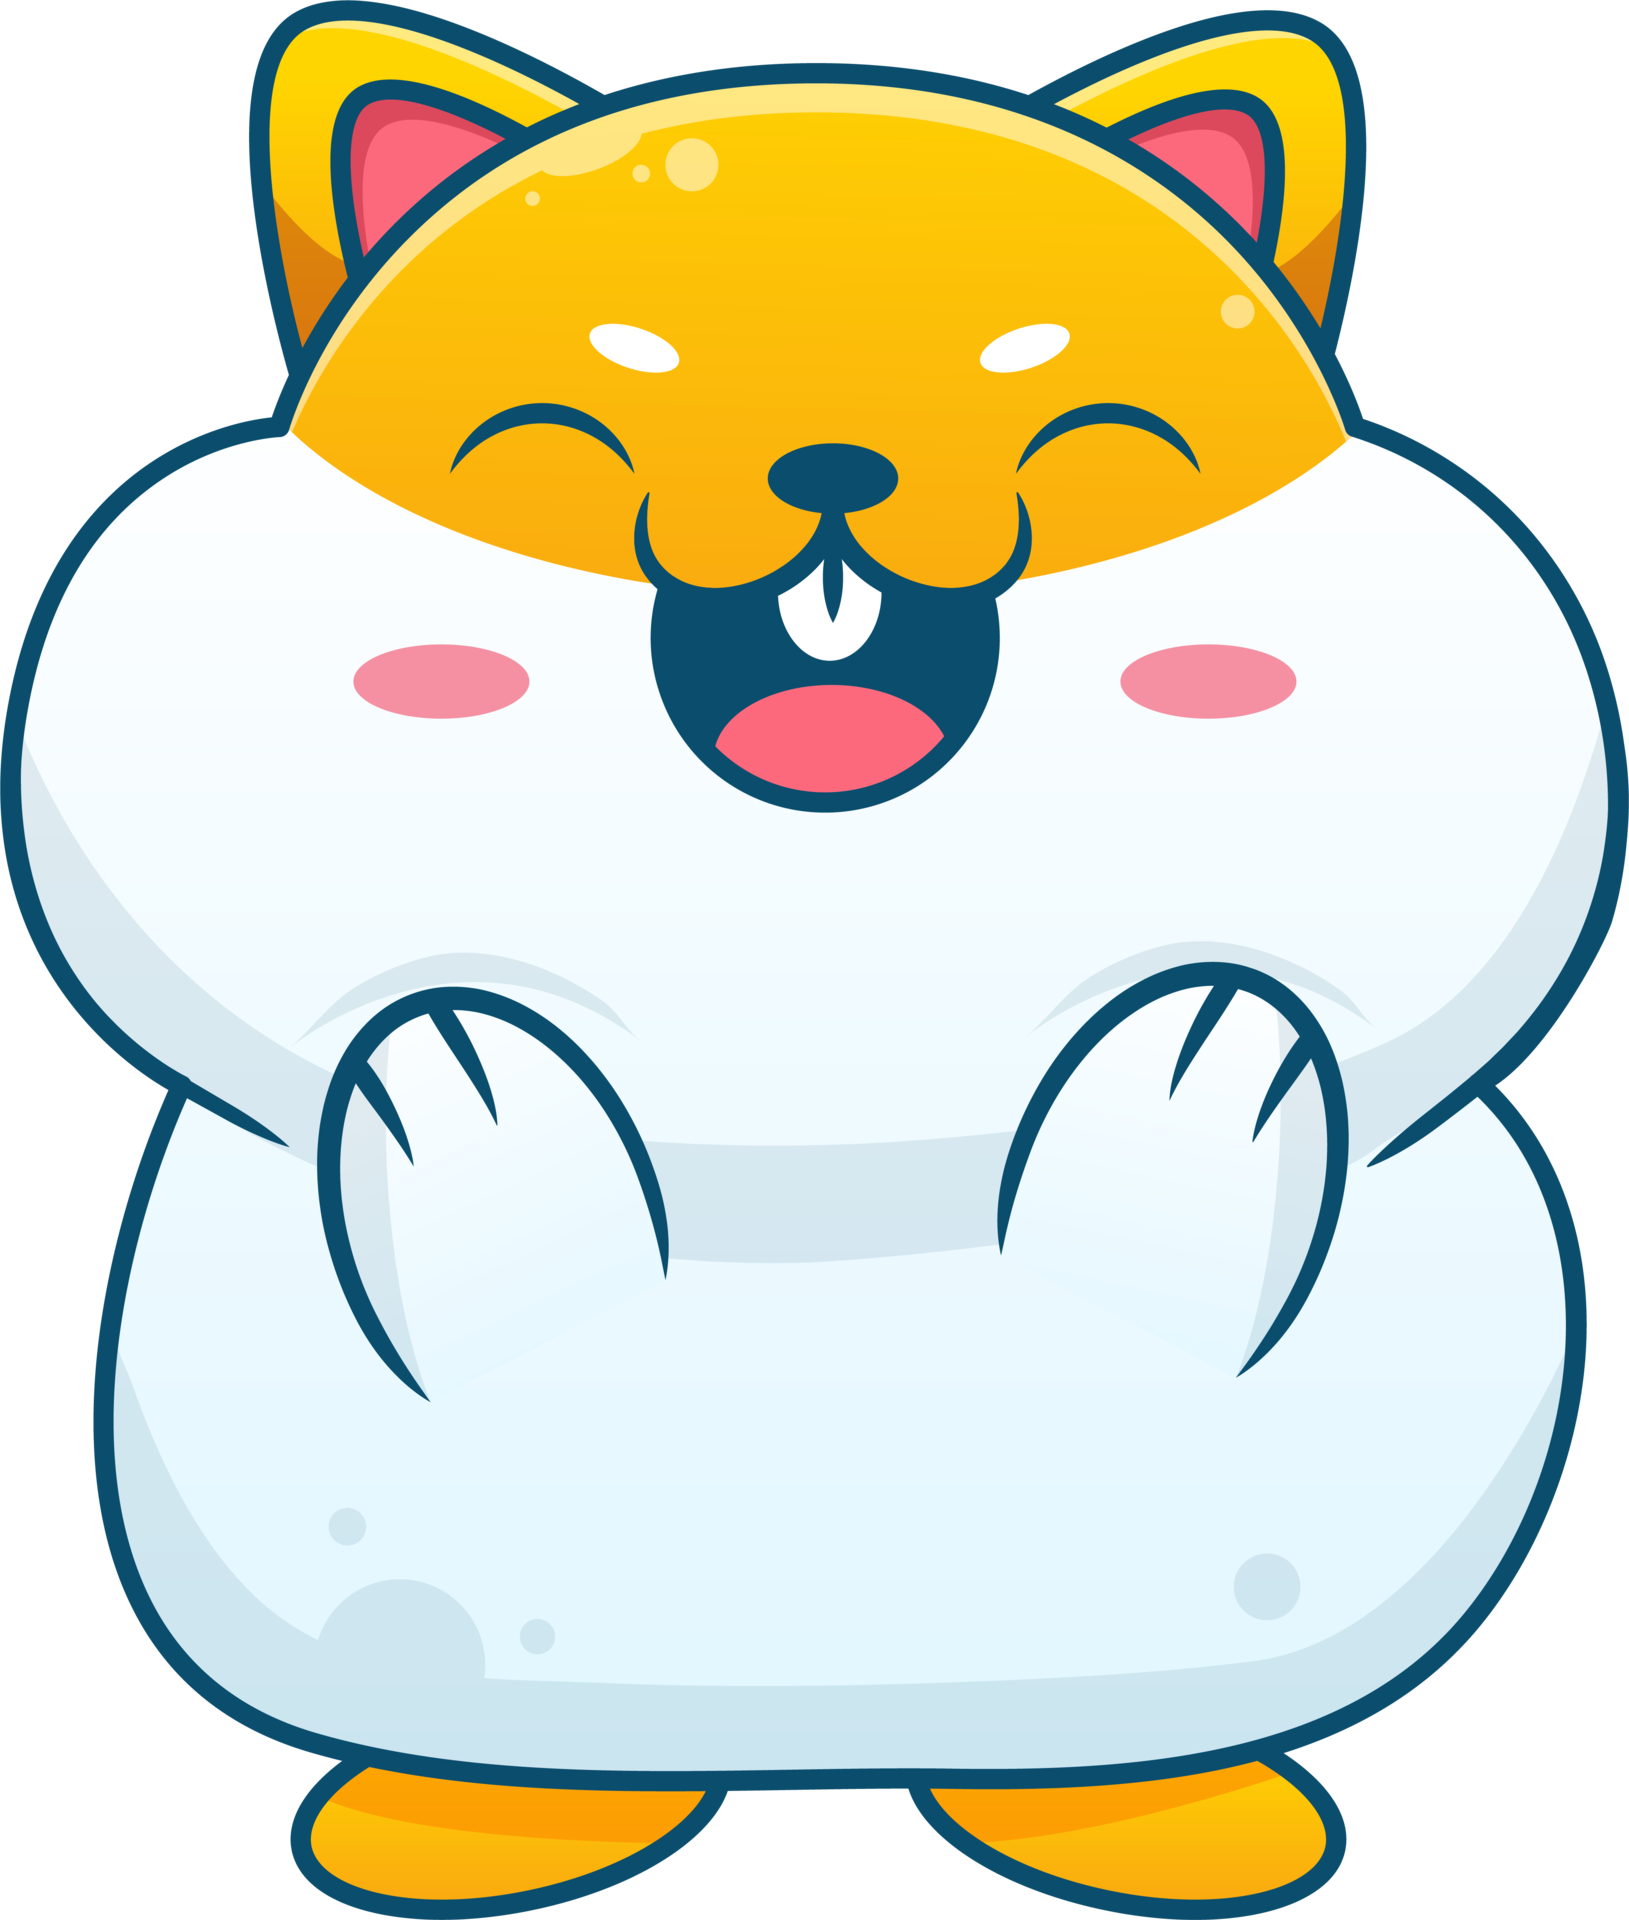 Bunny PNG Free Images with Transparent Background - (3,215 Free Downloads)